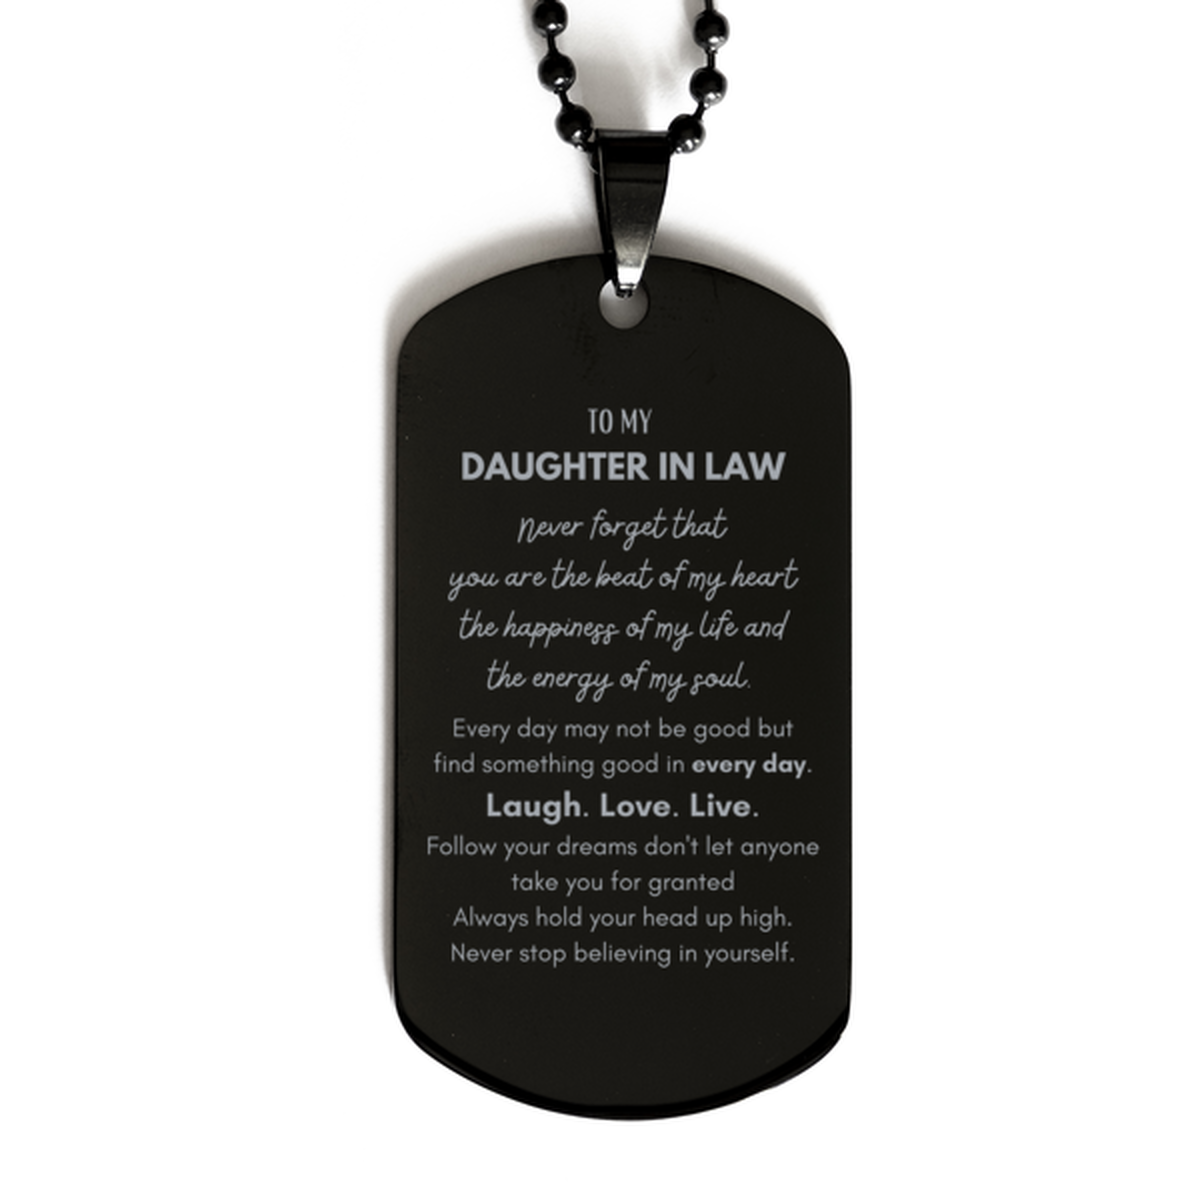 To My Daughter In Law Dogtag Gifts, Christmas Daughter In Law Black Dog Tag Present, Birthday Unique Motivational For Daughter In Law, To My Daughter In Law Never forget that you are the beat of my heart the happiness of my life and the energy of my soul